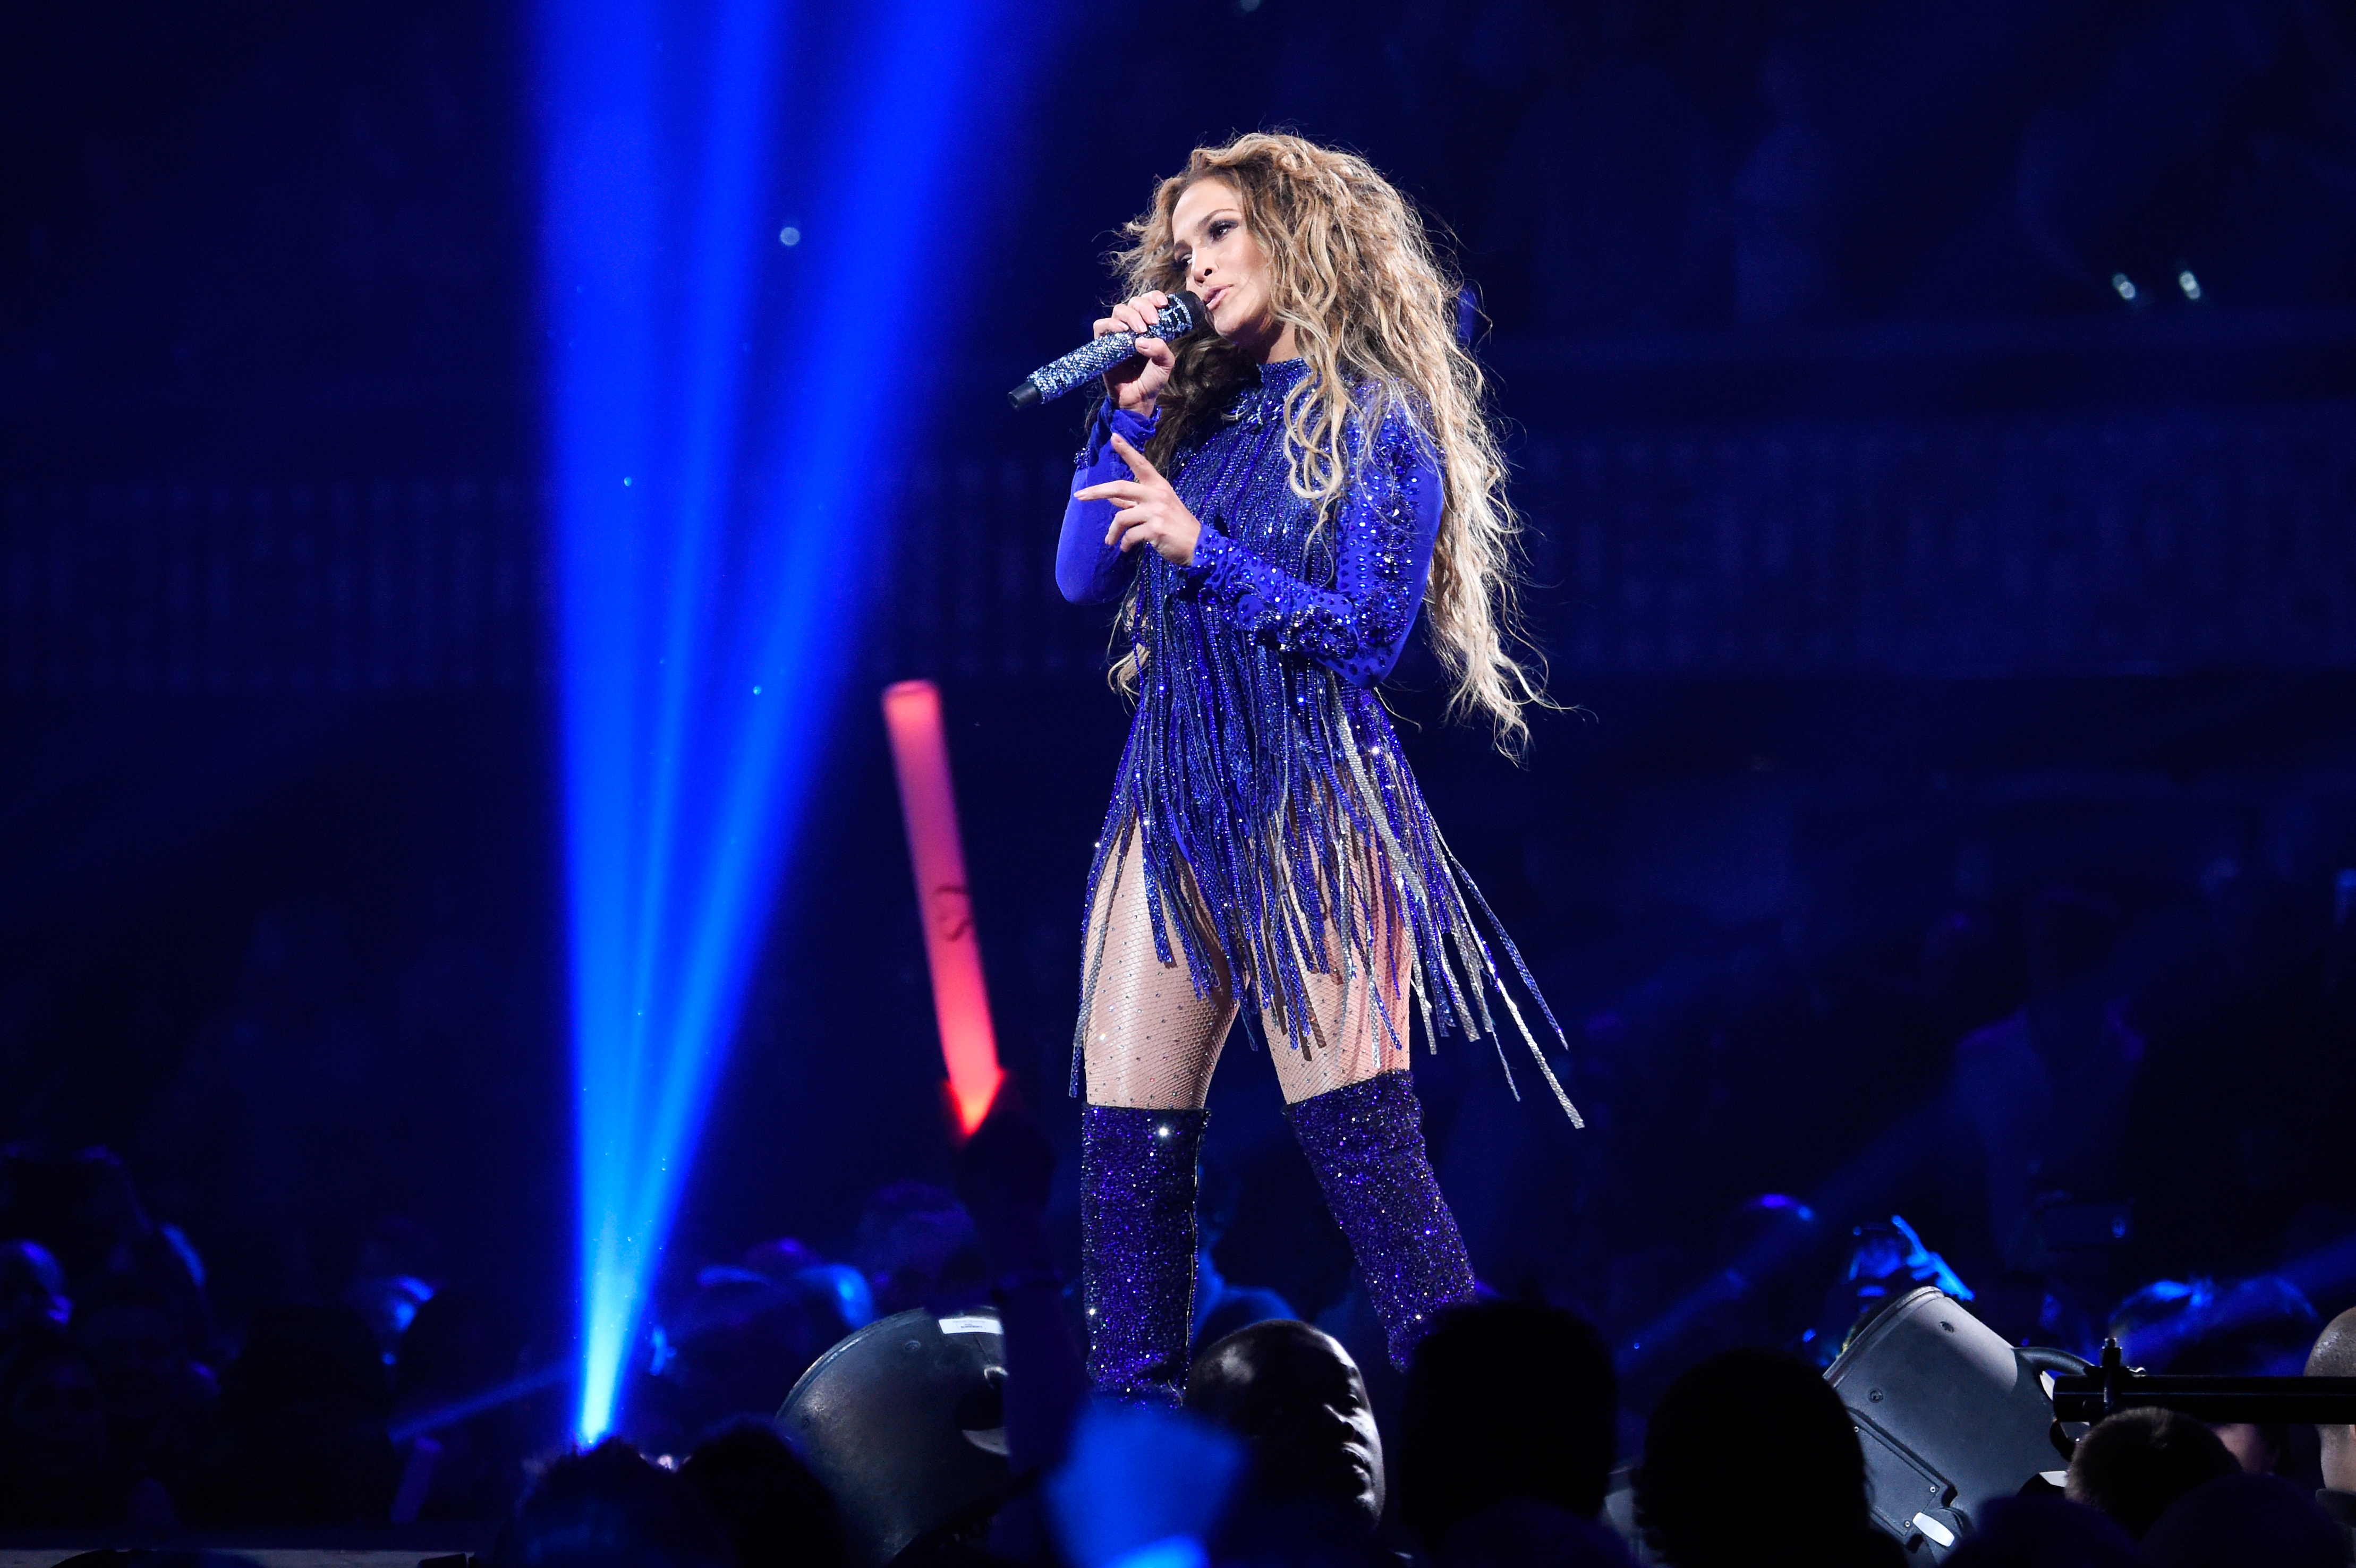 Jennifer Lopez performs onstage during the 2018 DIRECTV NOW Super Saturday Night Concert at NOMADIC LIVE! at The Armory on Feb. 3, 2018 in Minneapolis, Minnesota. (Kevin Mazur—DirecTV/Getty Images)